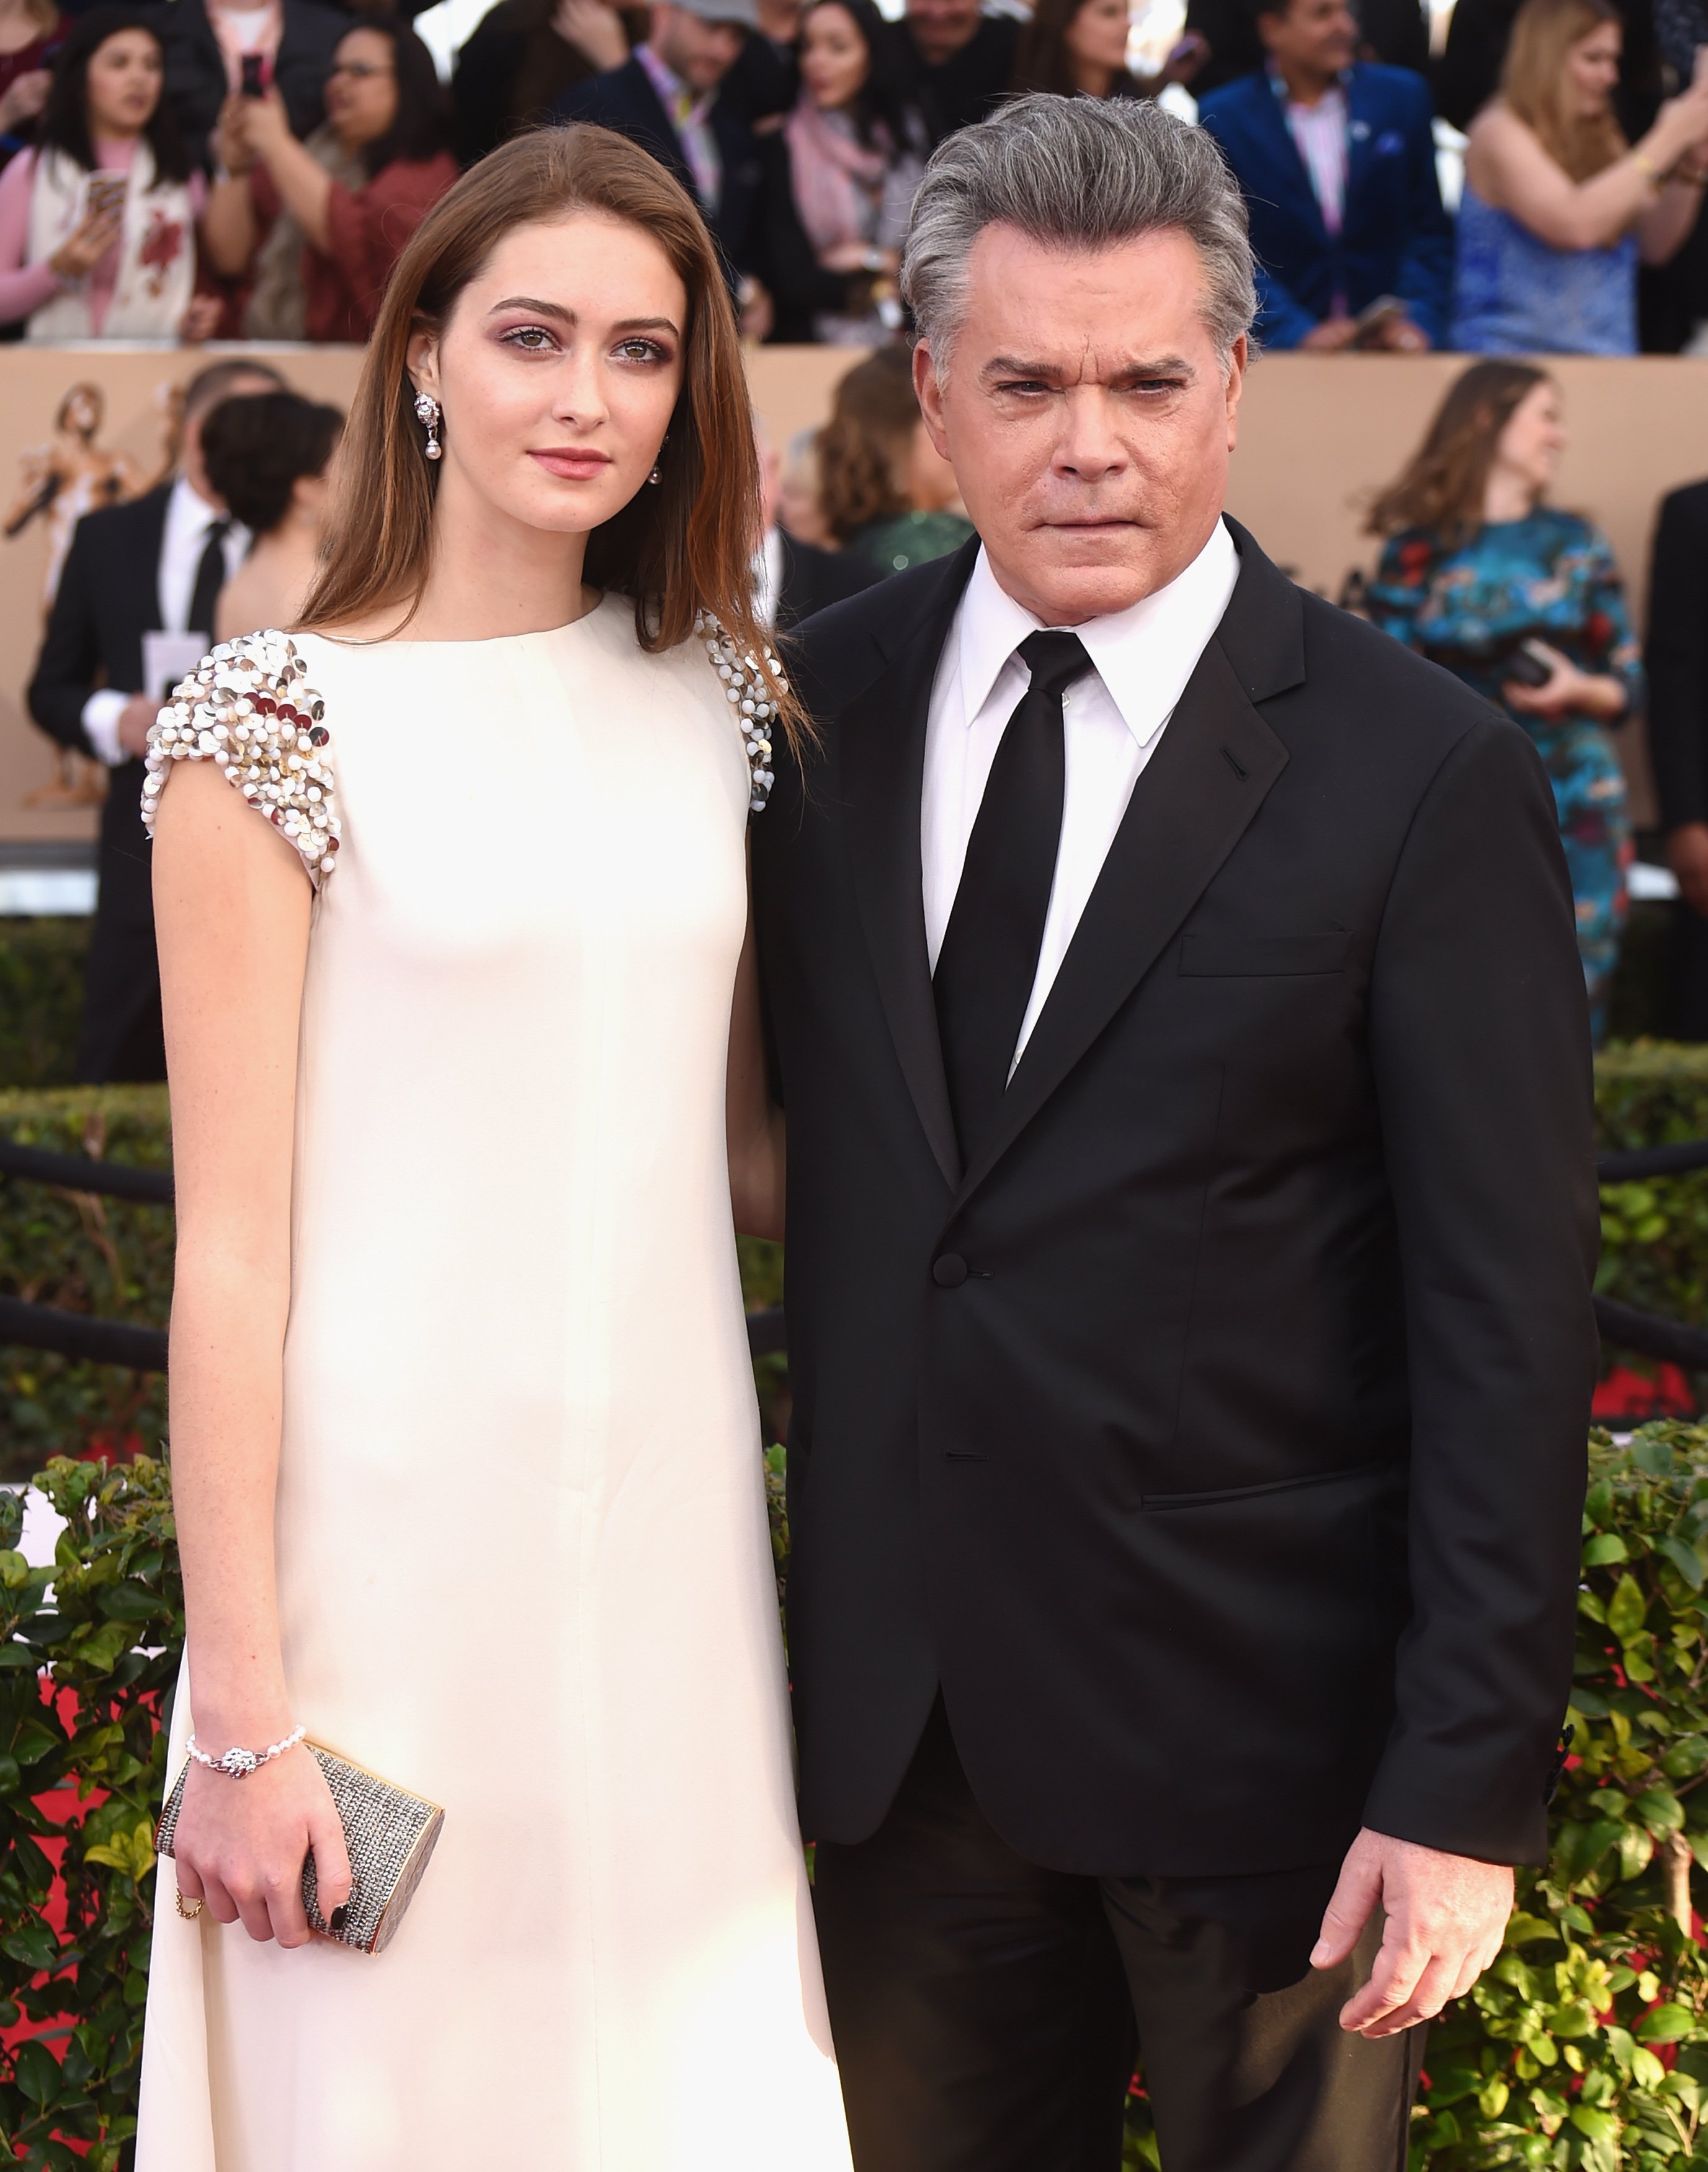 Karsen and Ray Liotta at the 22nd Annual Screen Actors Guild Awards on January 30, 2016, in Los Angeles, California. | Source: Jeff Kravitz/FilmMagic/Getty Images